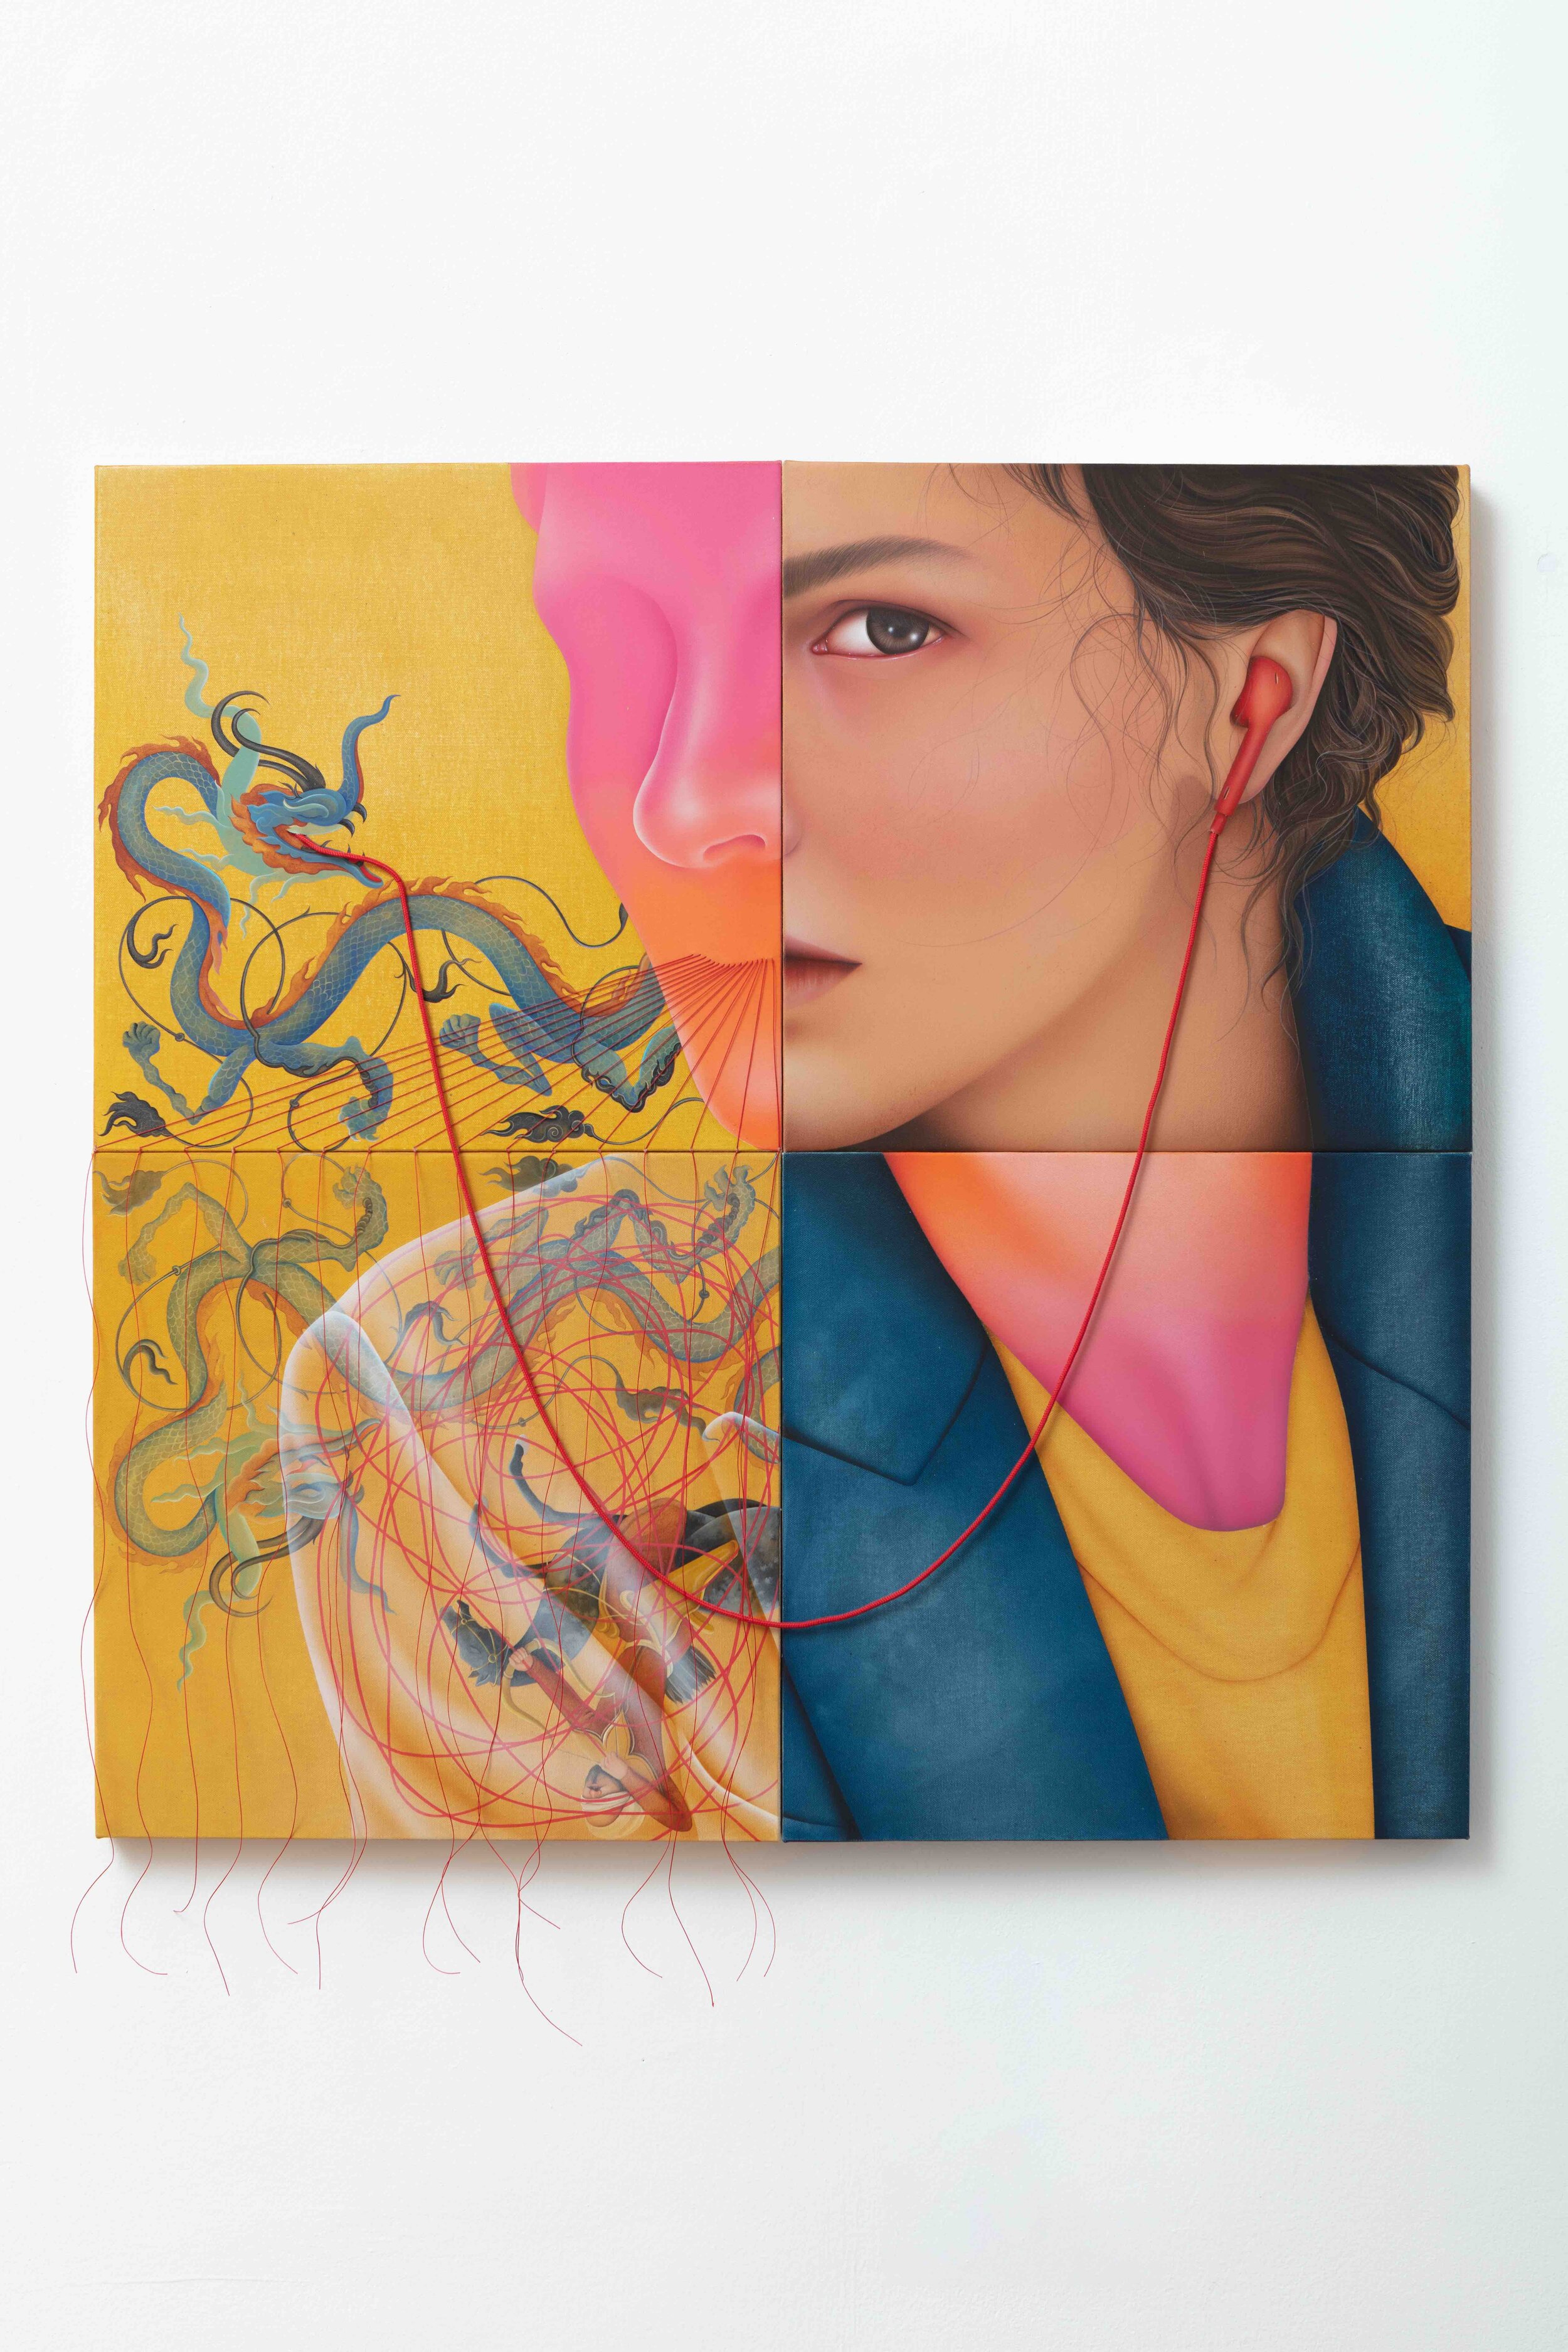 Arghavan Khosravi_Entrapment, 2021_Acrylic on four canvas wrapped wood panels, polyester rope, polyester thread_80h x 80w cm_31.50h x 31.50w in_ARK008.jpeg